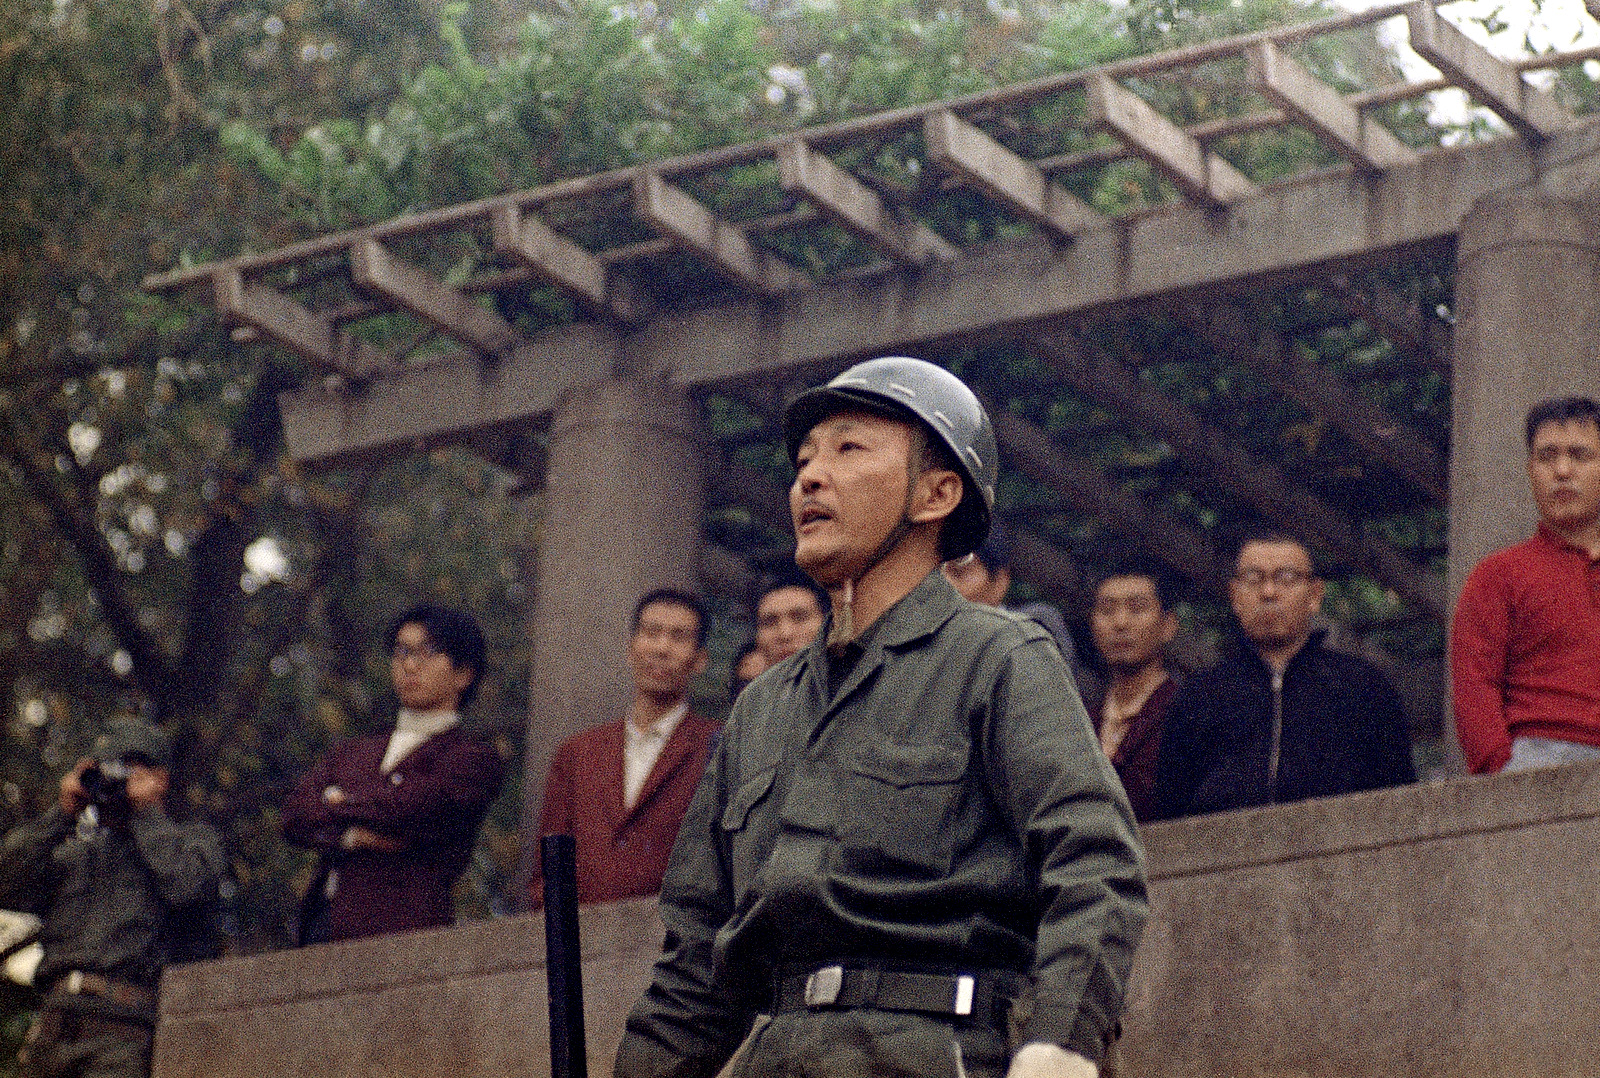 Yoshio Kodama, head of the rightist “Zenai Kaigi” association, inspects volunteer militia in Tokyo, Japan in this April 11, 1969 photo. Declassified CIA records, released in January 2007 by the U.S. National Archives and obtained by The Associated Press, document more fully than ever how suspected Japanese war criminals joined intelligence missions funded or otherwise supported by the Americans during the early days of the Cold War. (AP Photo)